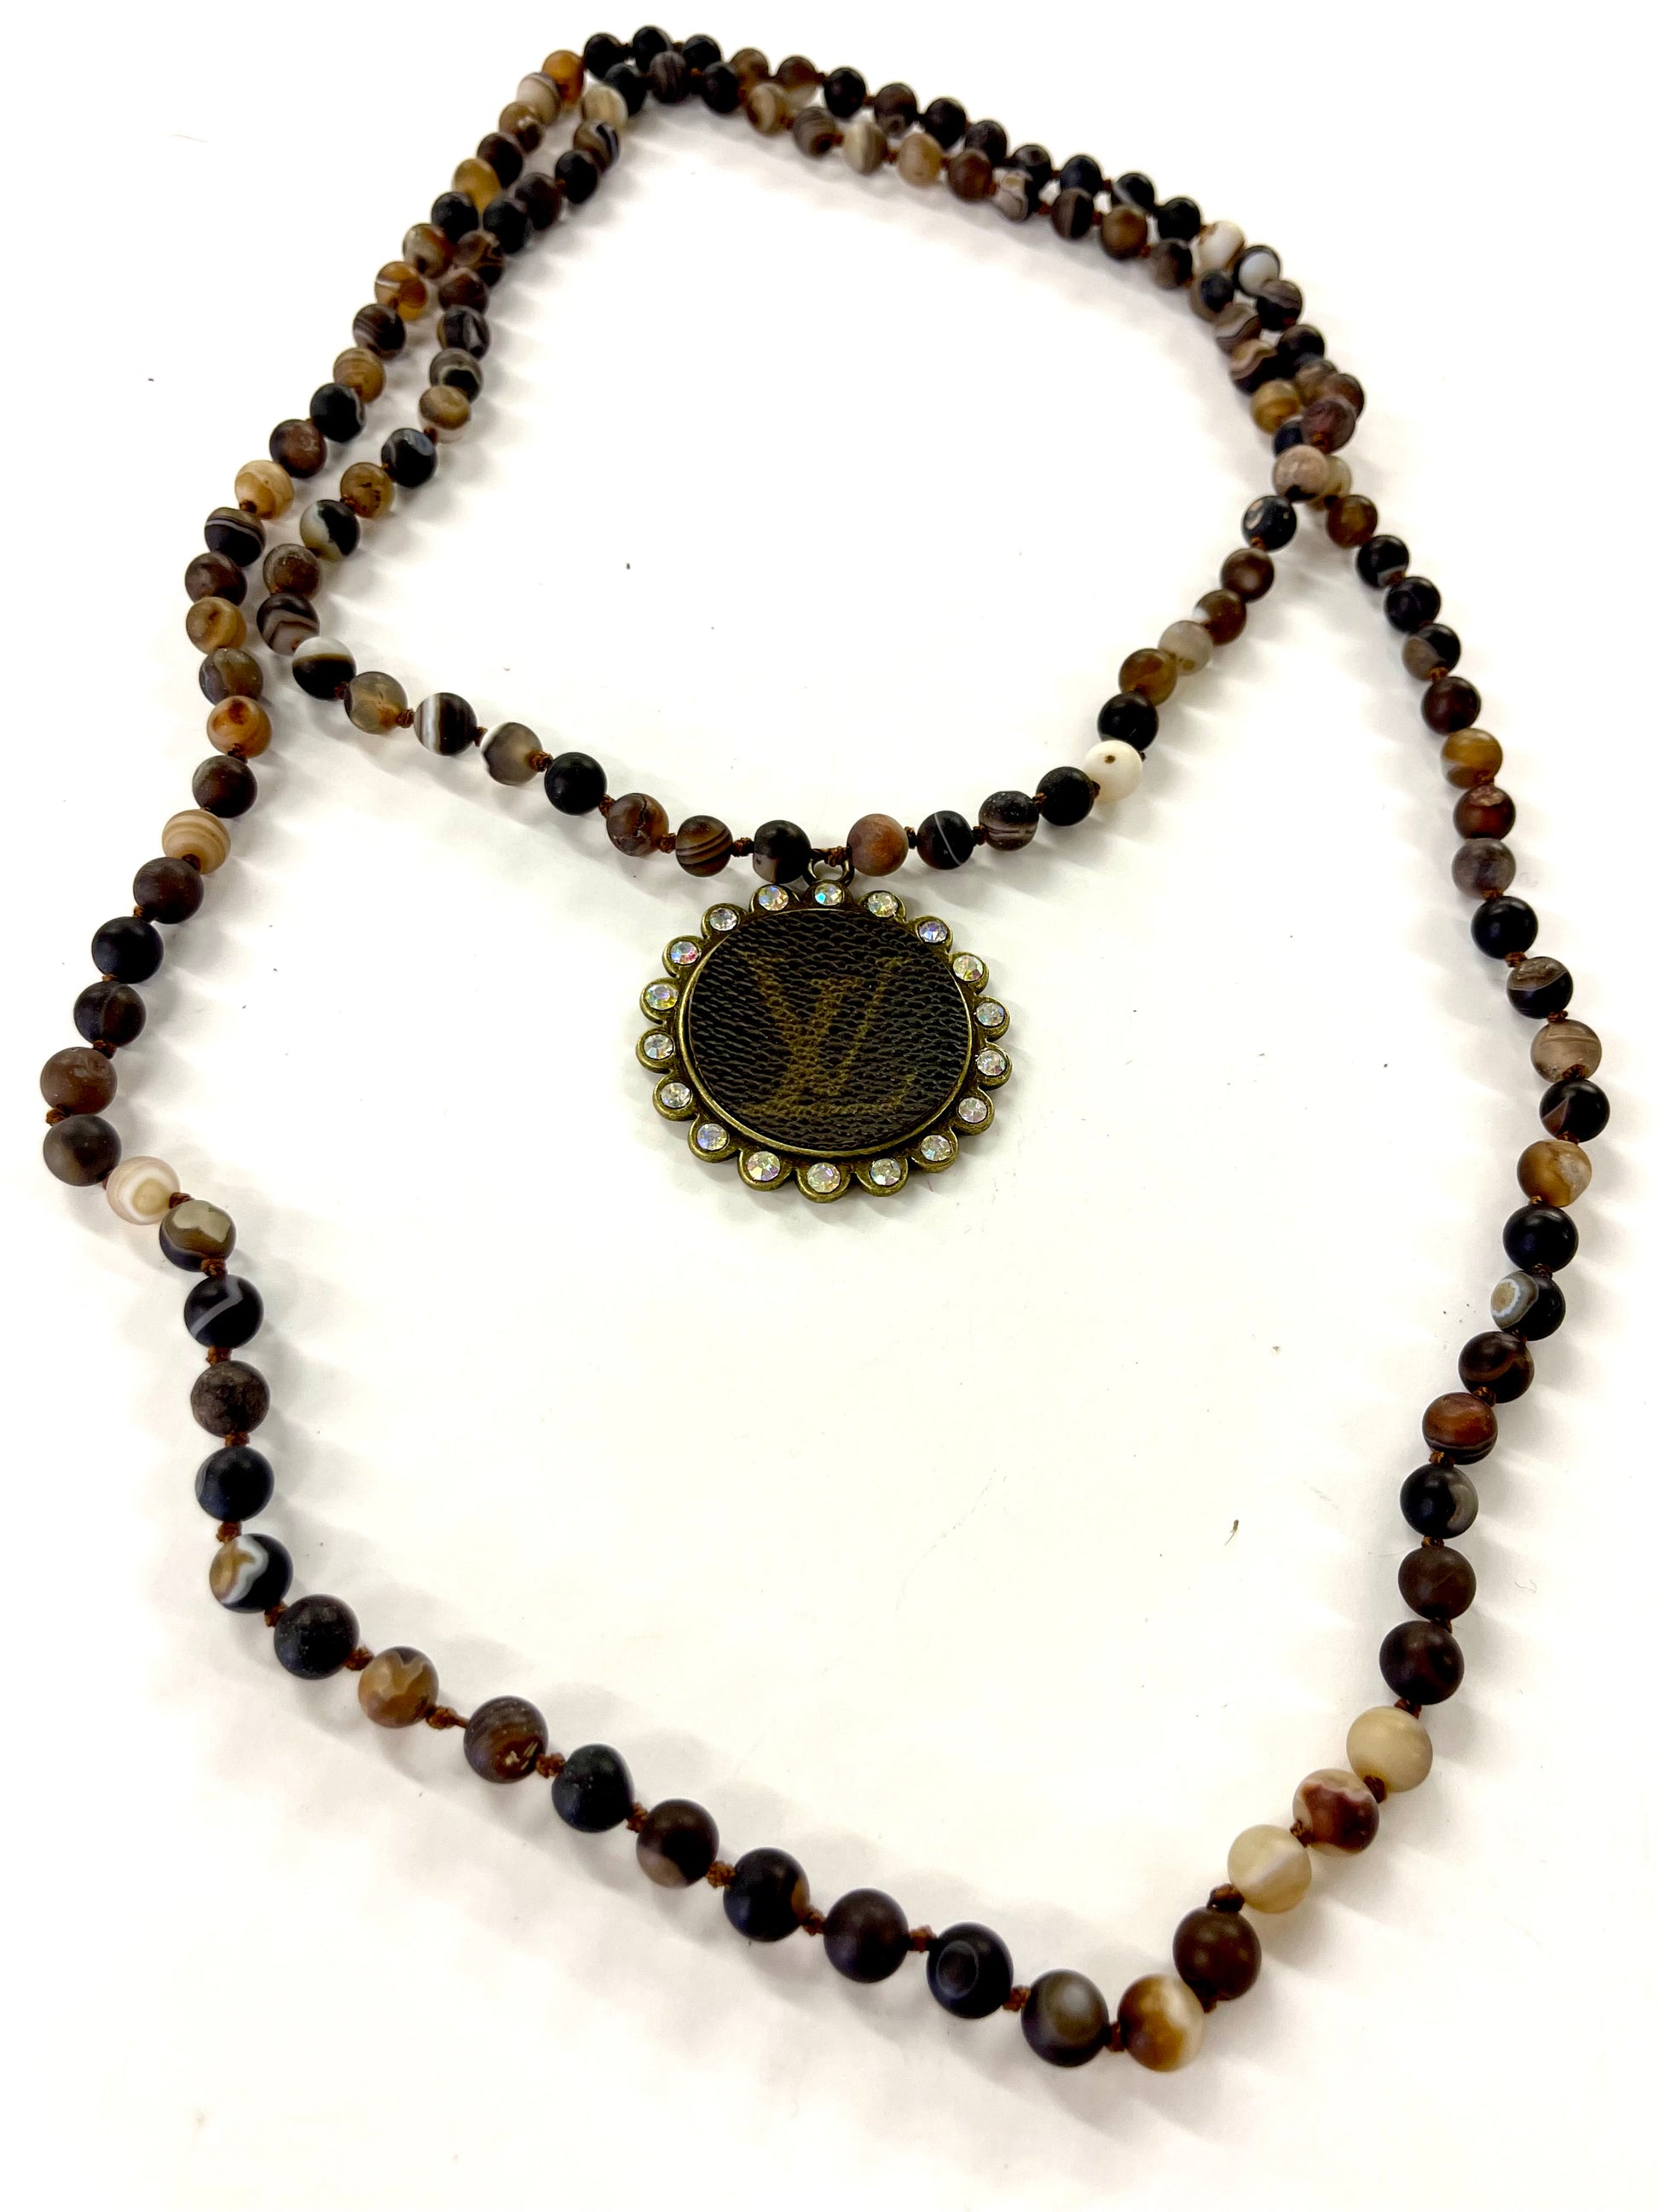 Stone- Black & brown swirl necklace with large teardrop pendant - Patches Of Upcycling